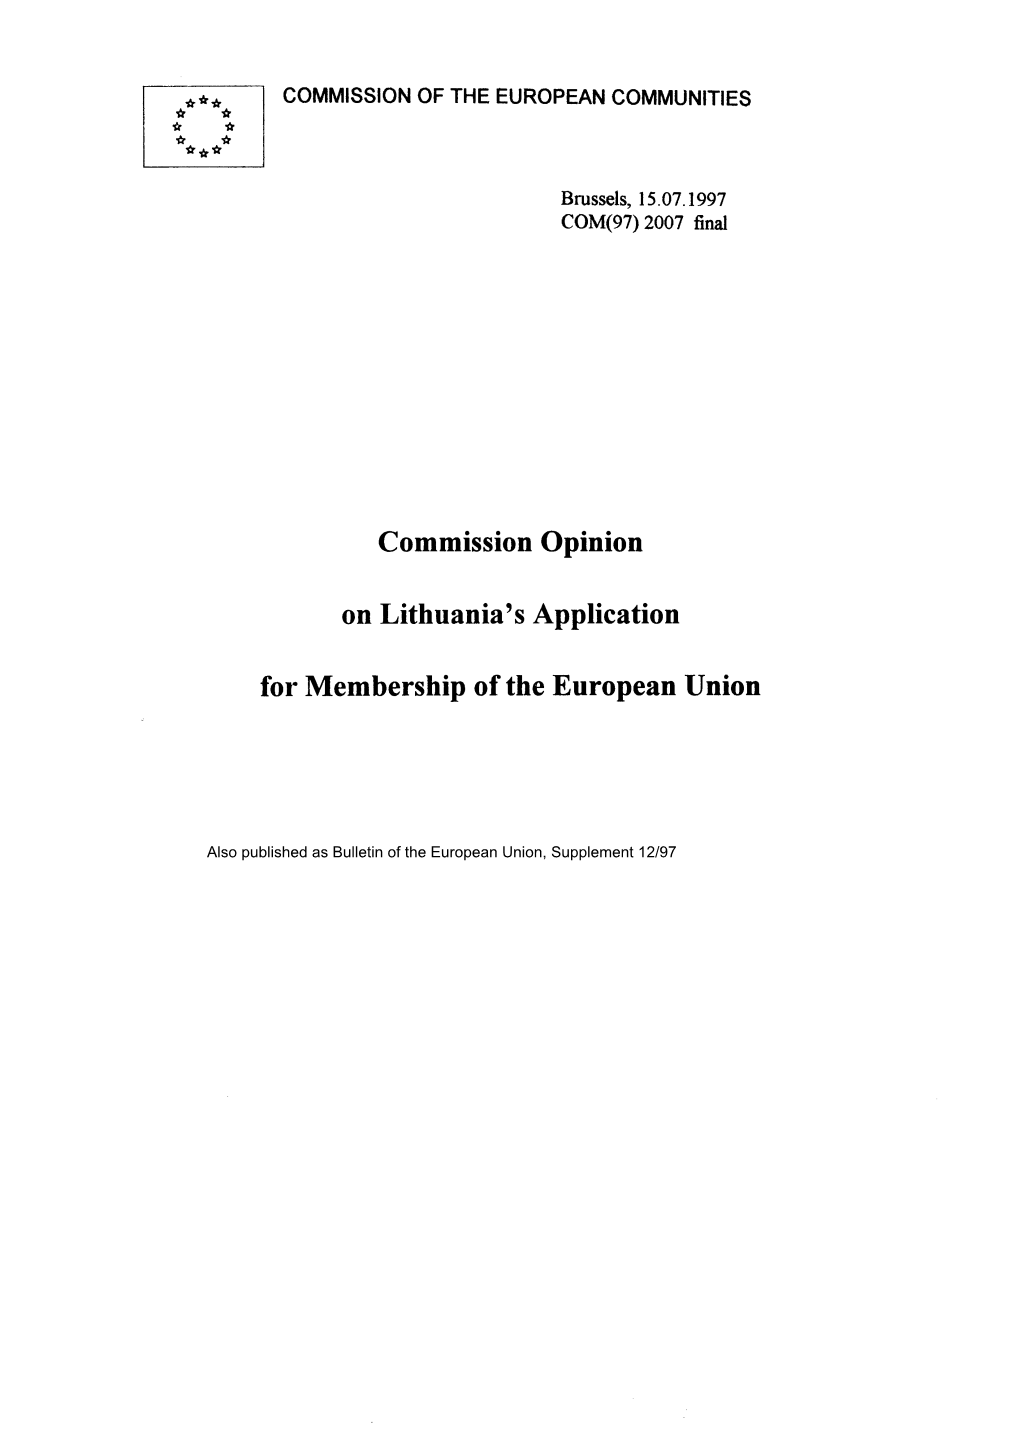 Commission Opinion on Lithuania's Application for Membership Of